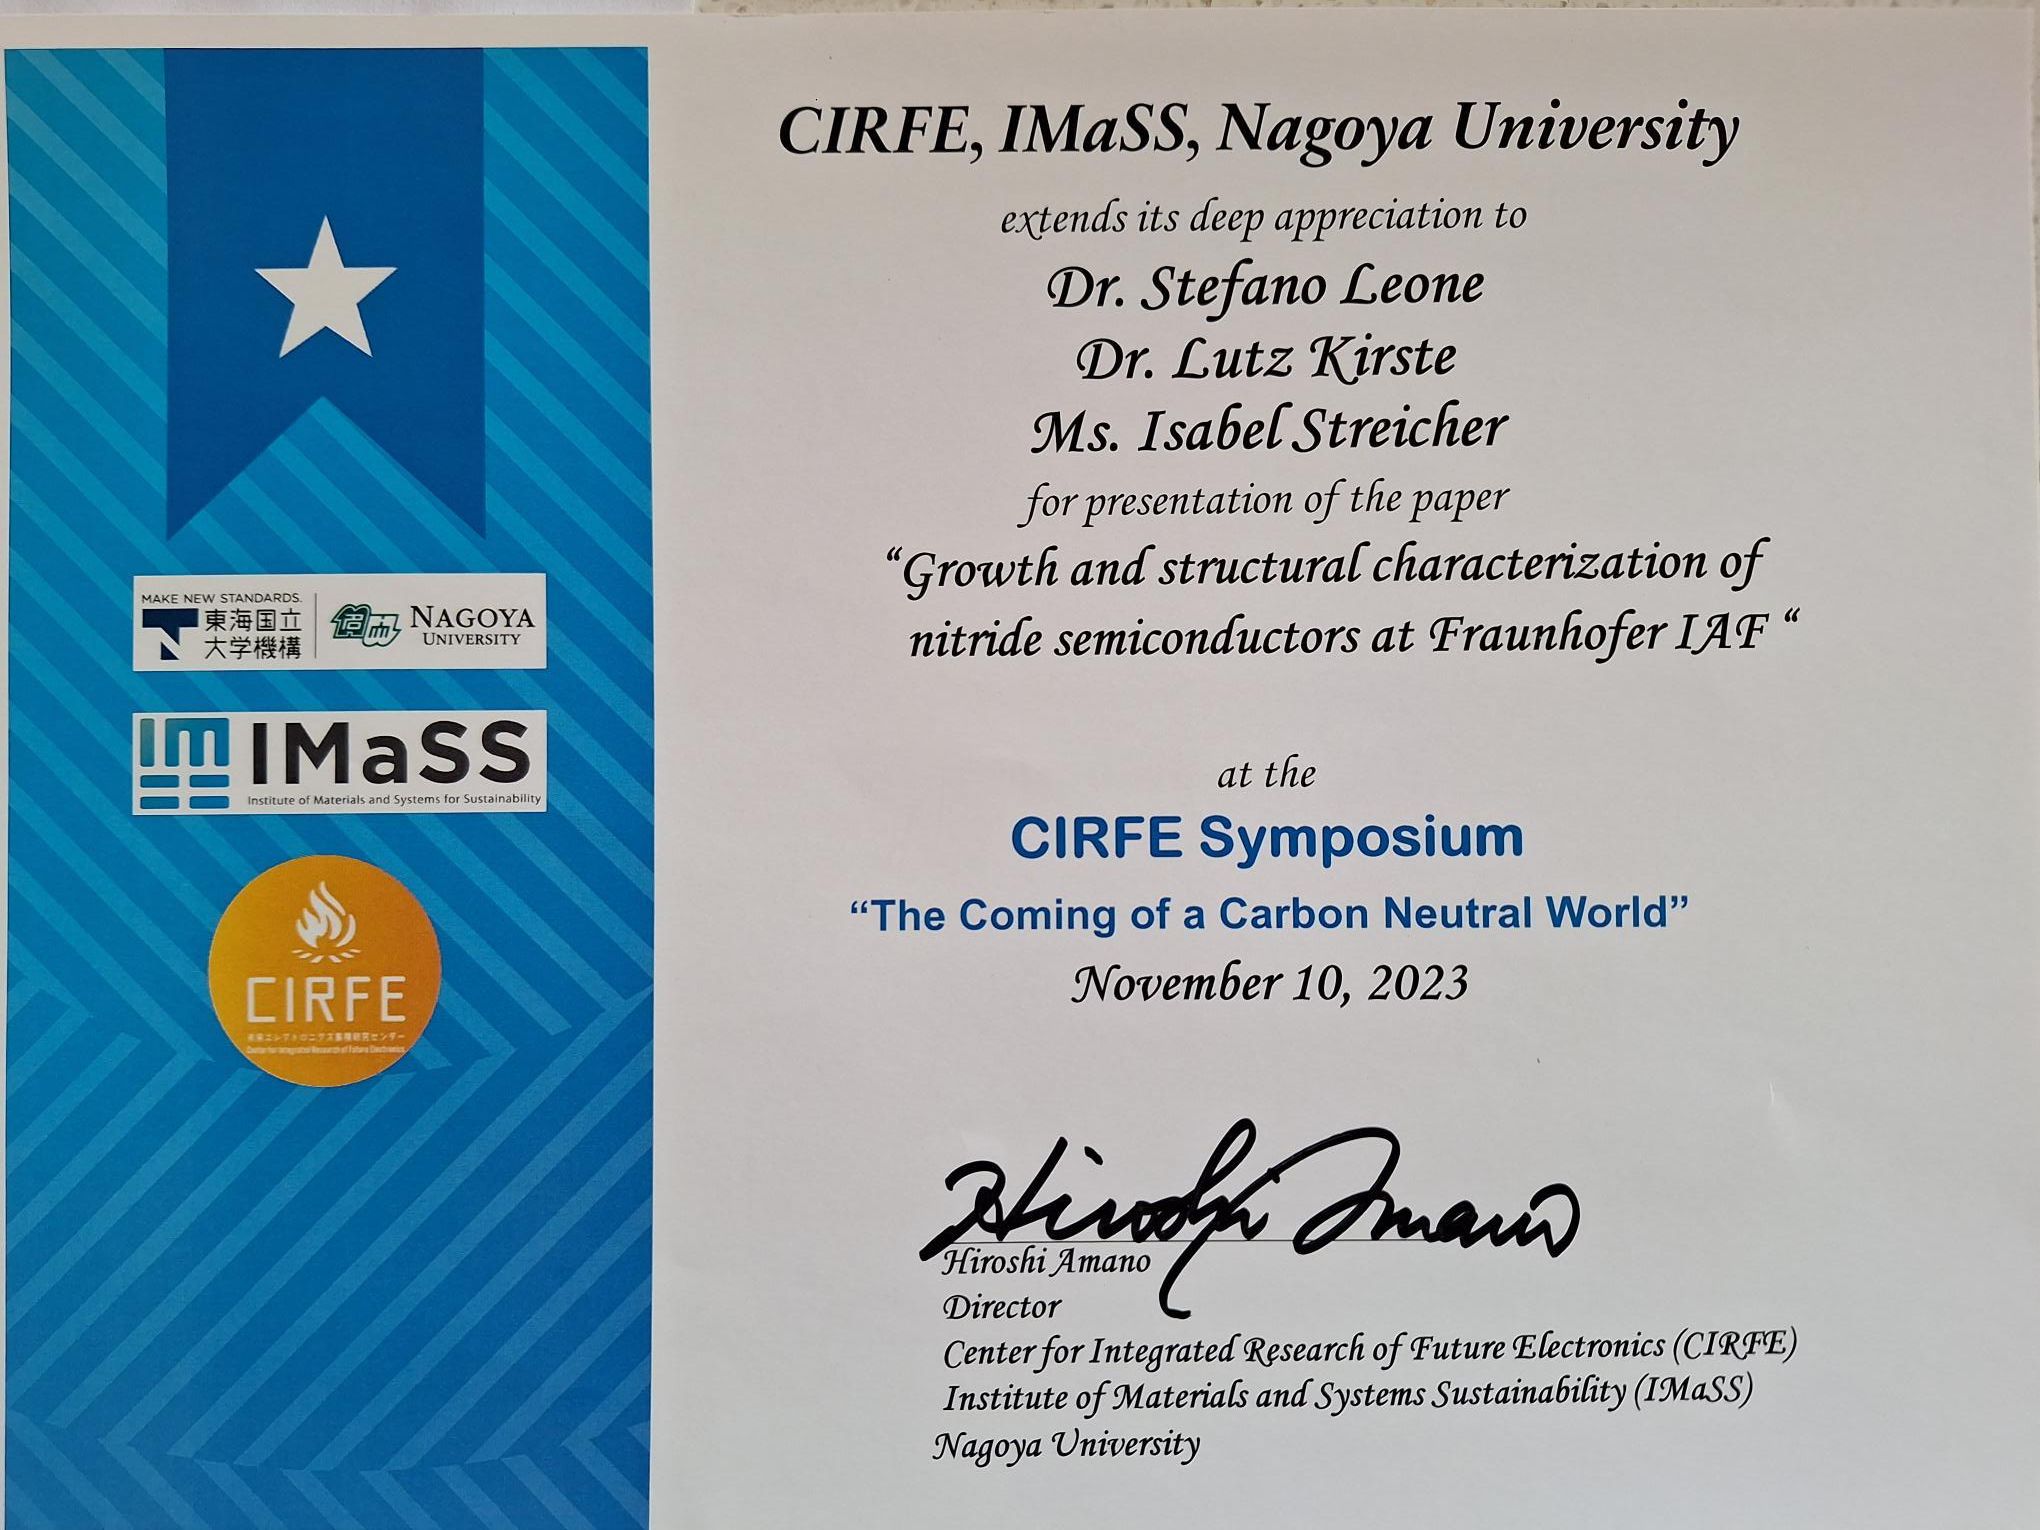 Certificate of participation in the CIRFE Symposium at Nagoya University